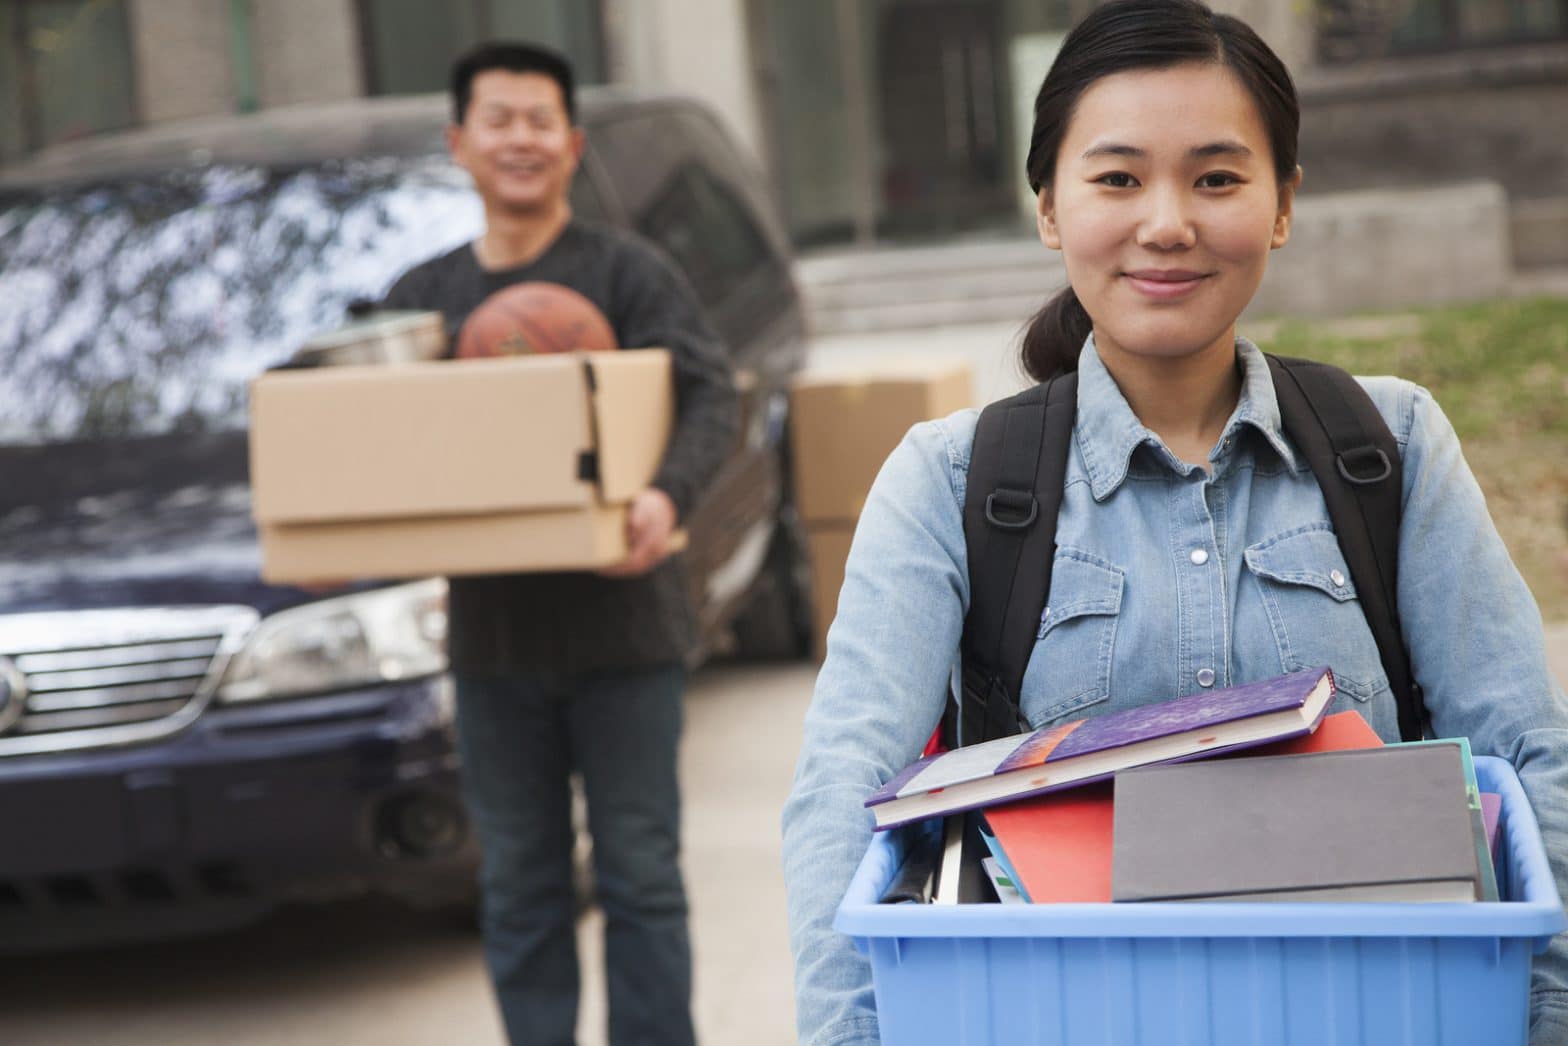 10 must-haves for your move to college